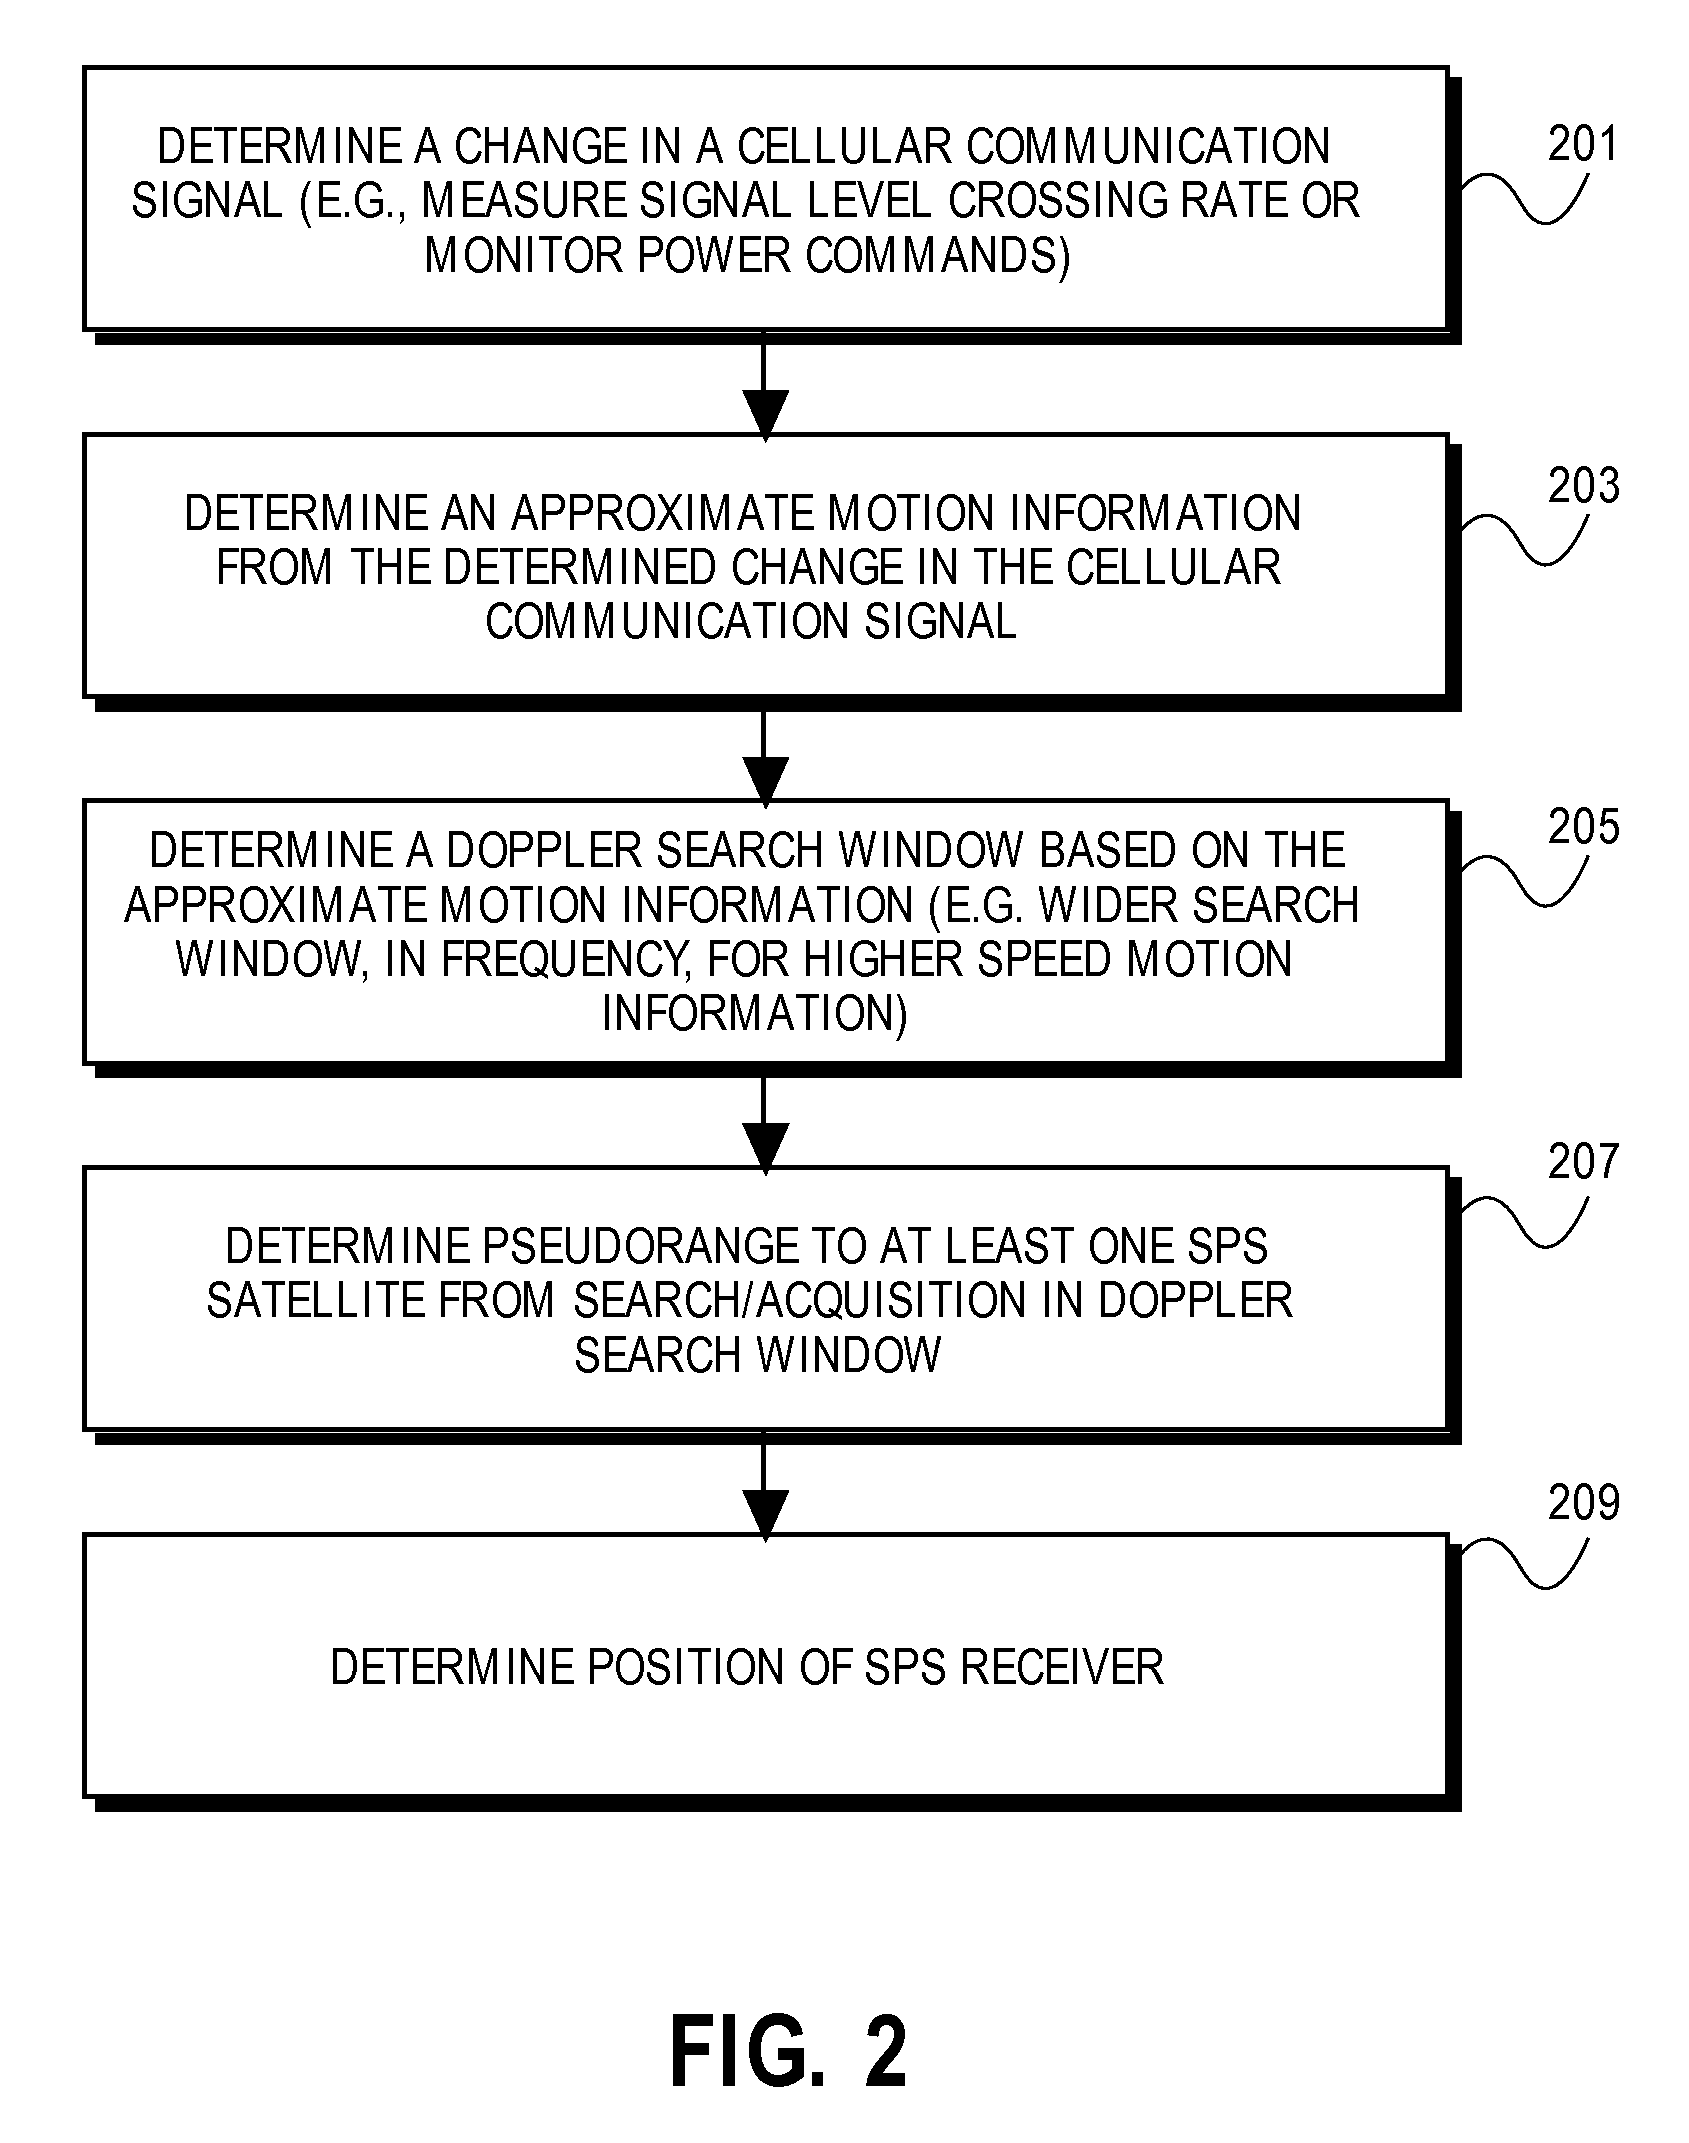 Method For Determining A Change In A Communication Signal And Using This Information To Improve SPS Signal Reception And Processing